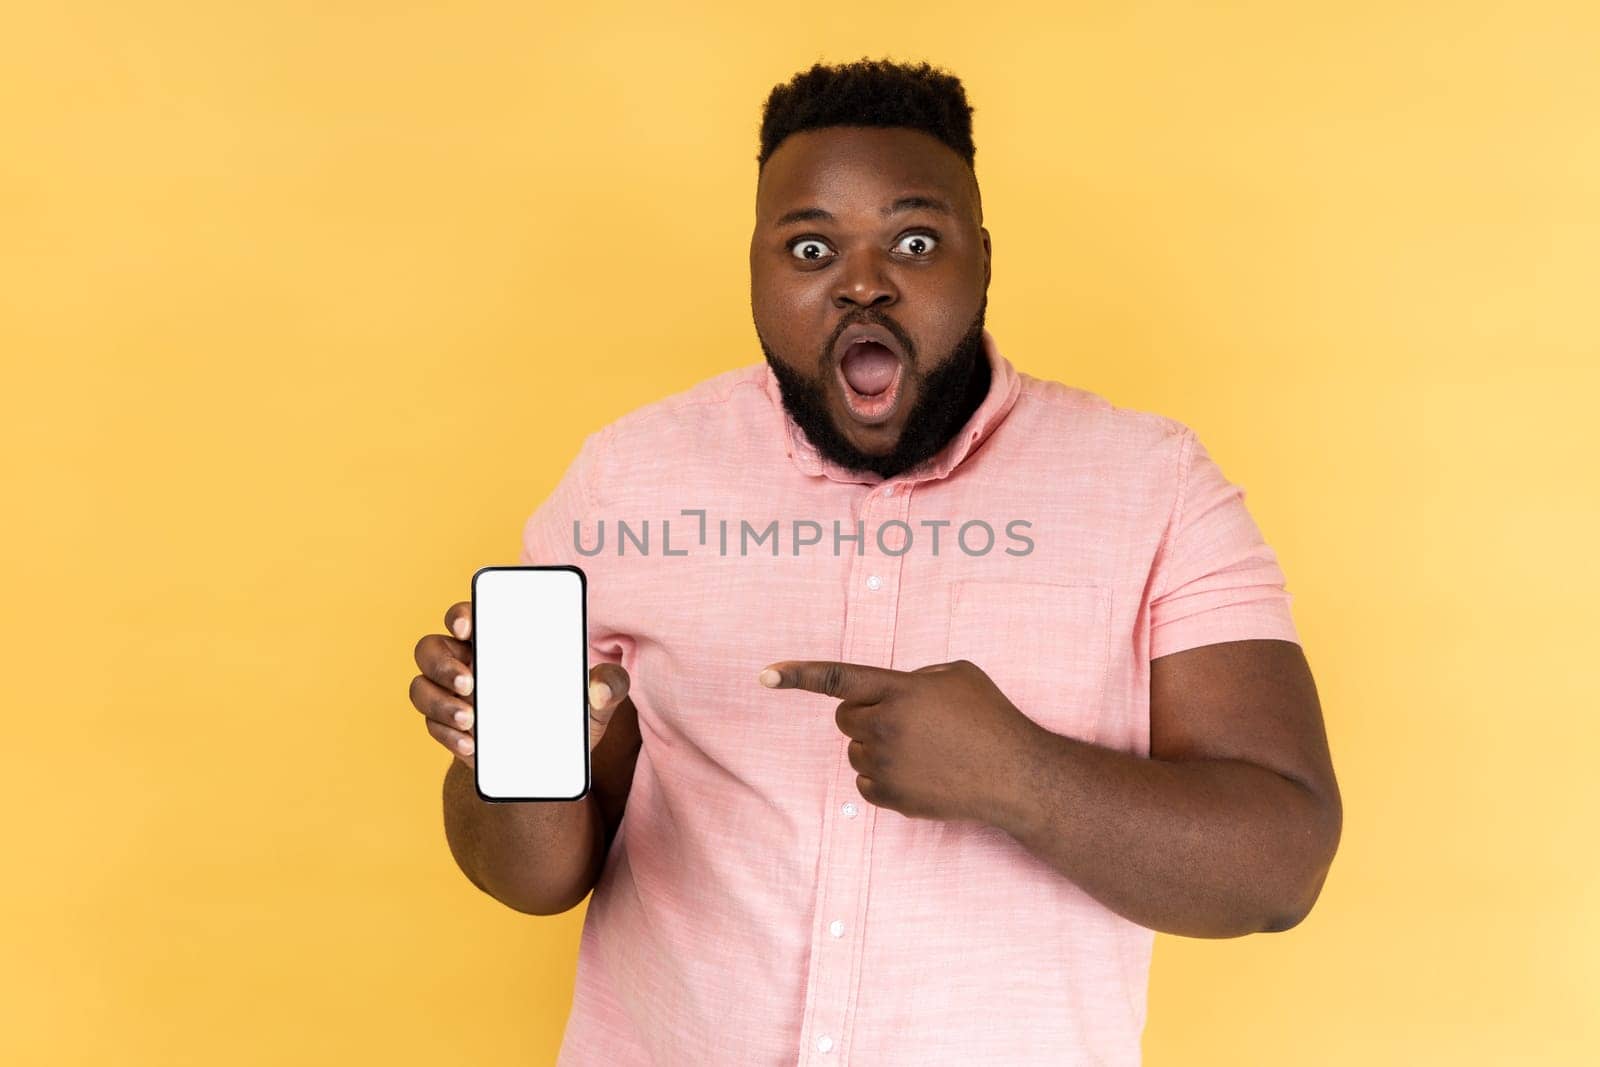 Portrait of shocked man wearing pink shirt pointing at cell phone screen, looking at camera with big eyes, showing mobile phone with white display. Indoor studio shot isolated on yellow background.